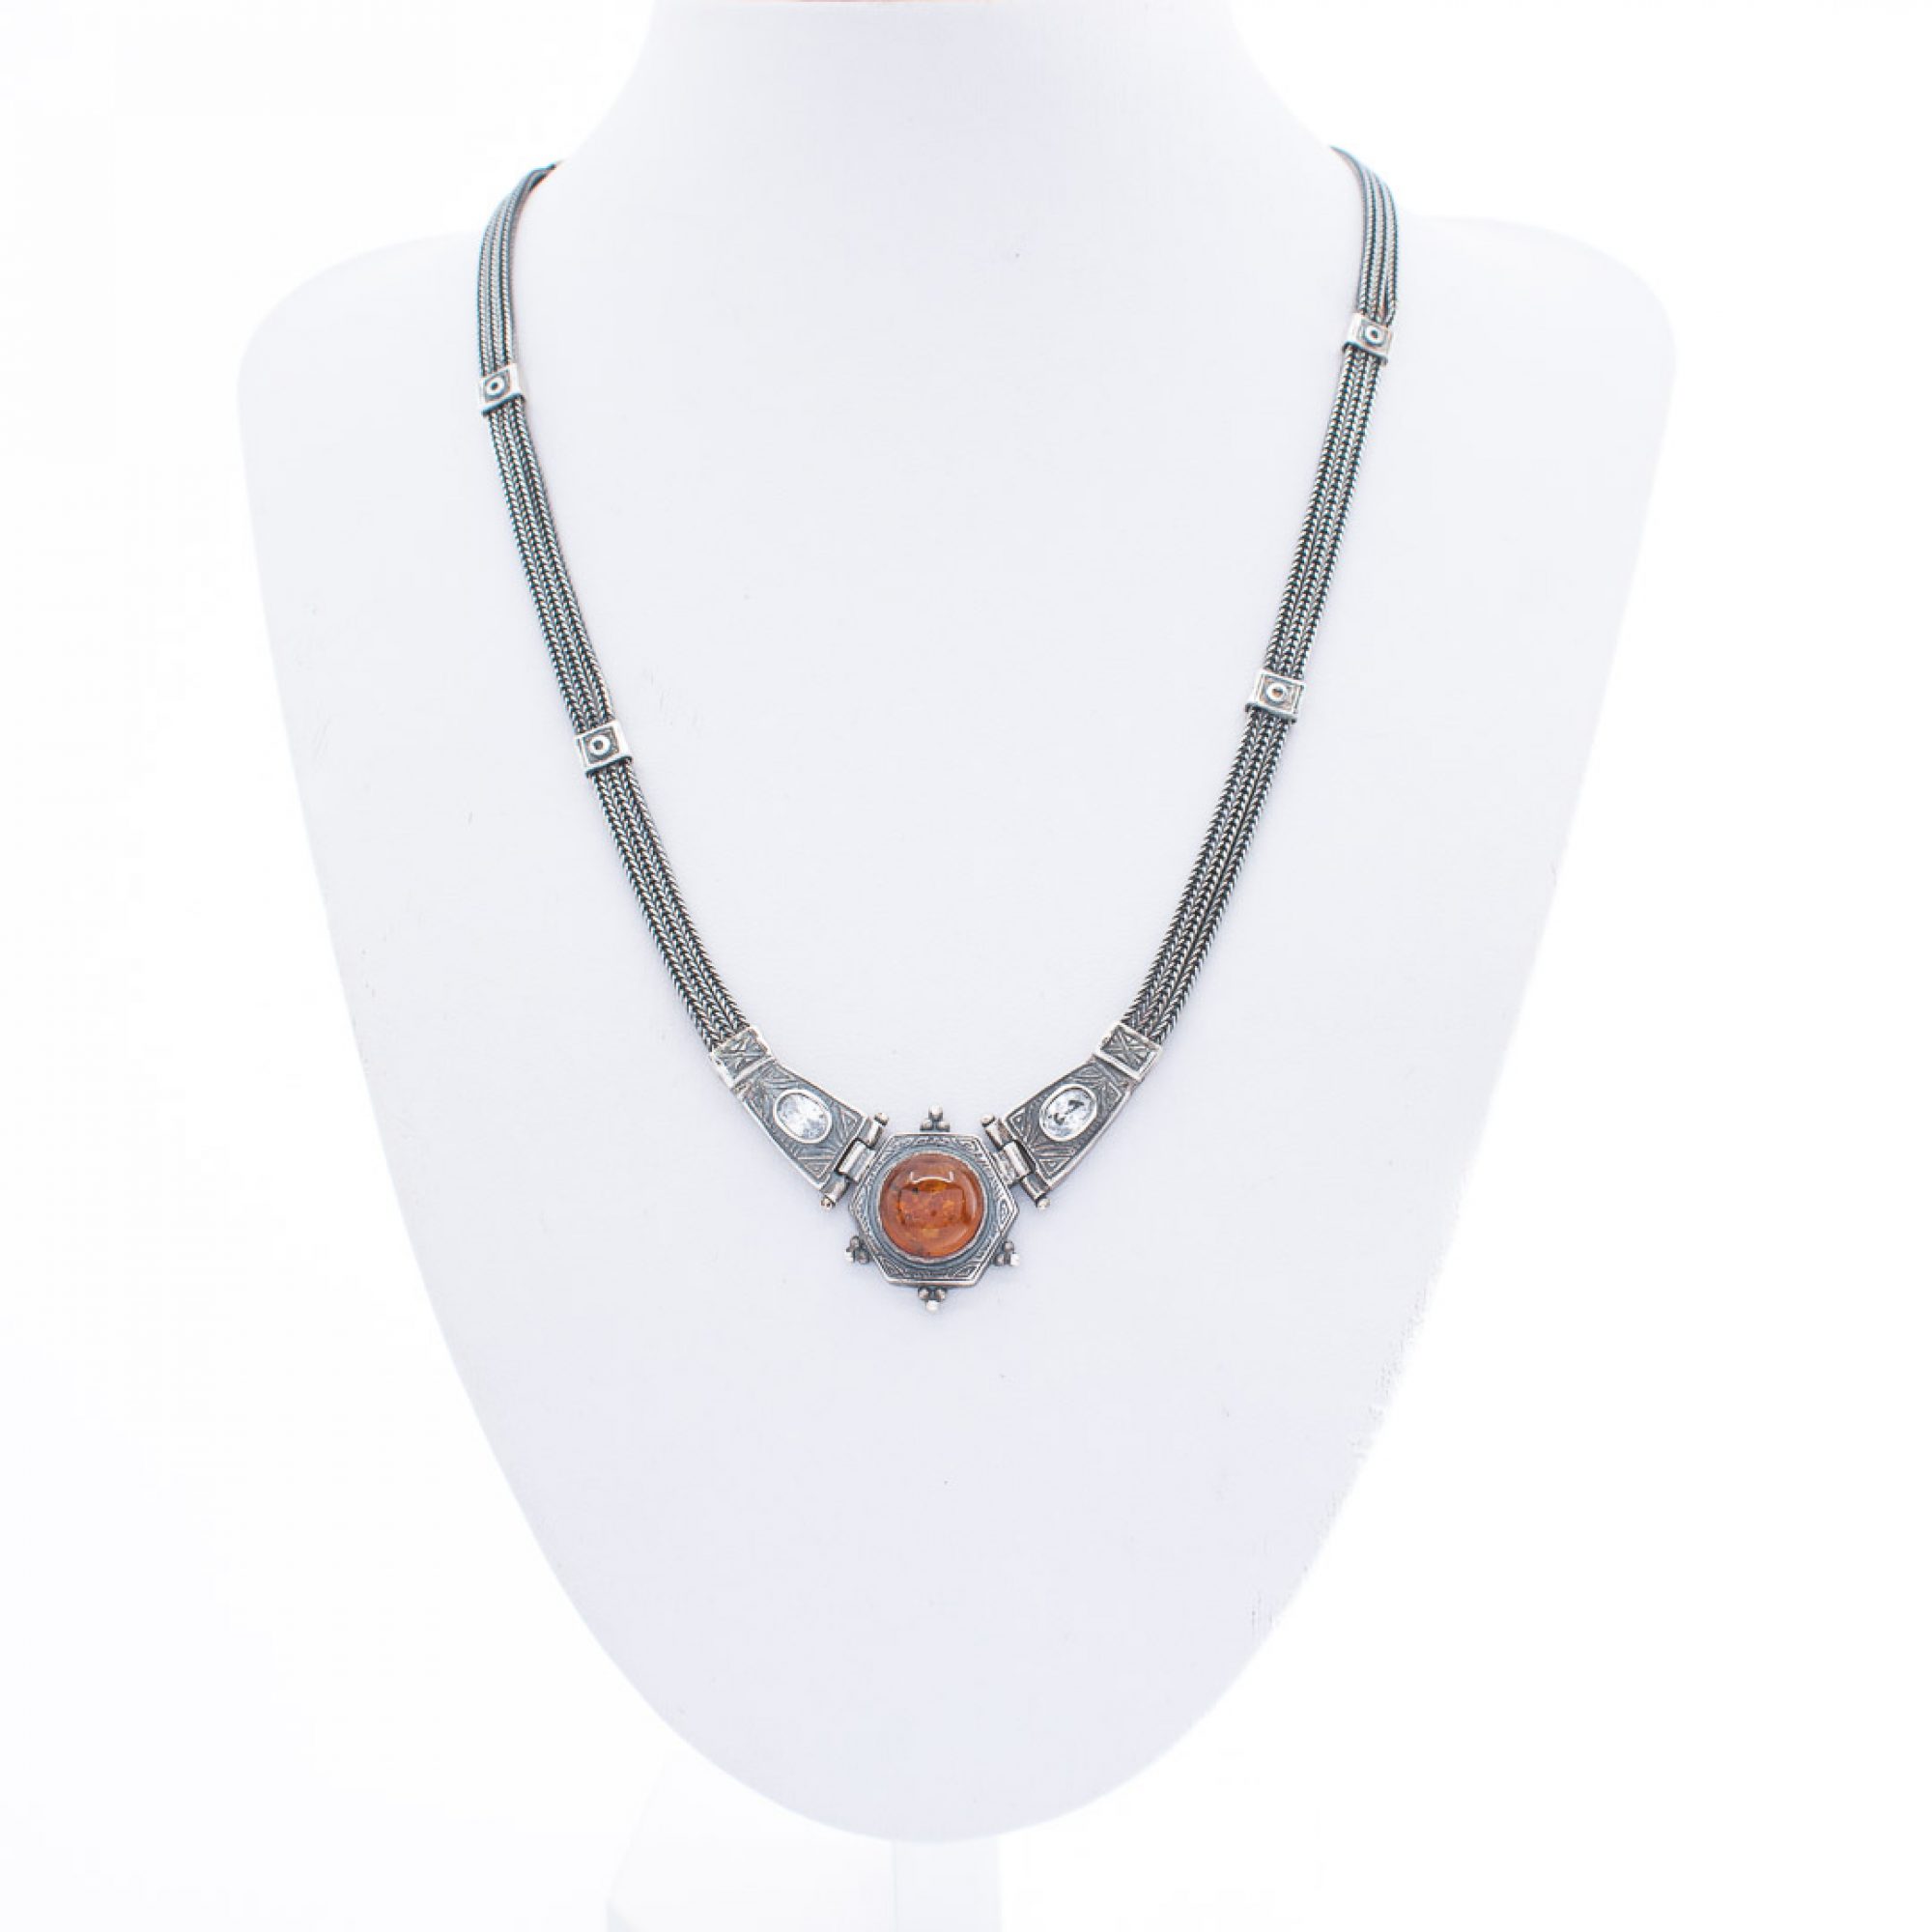 Oxidised necklace with natural amber and zircon stones